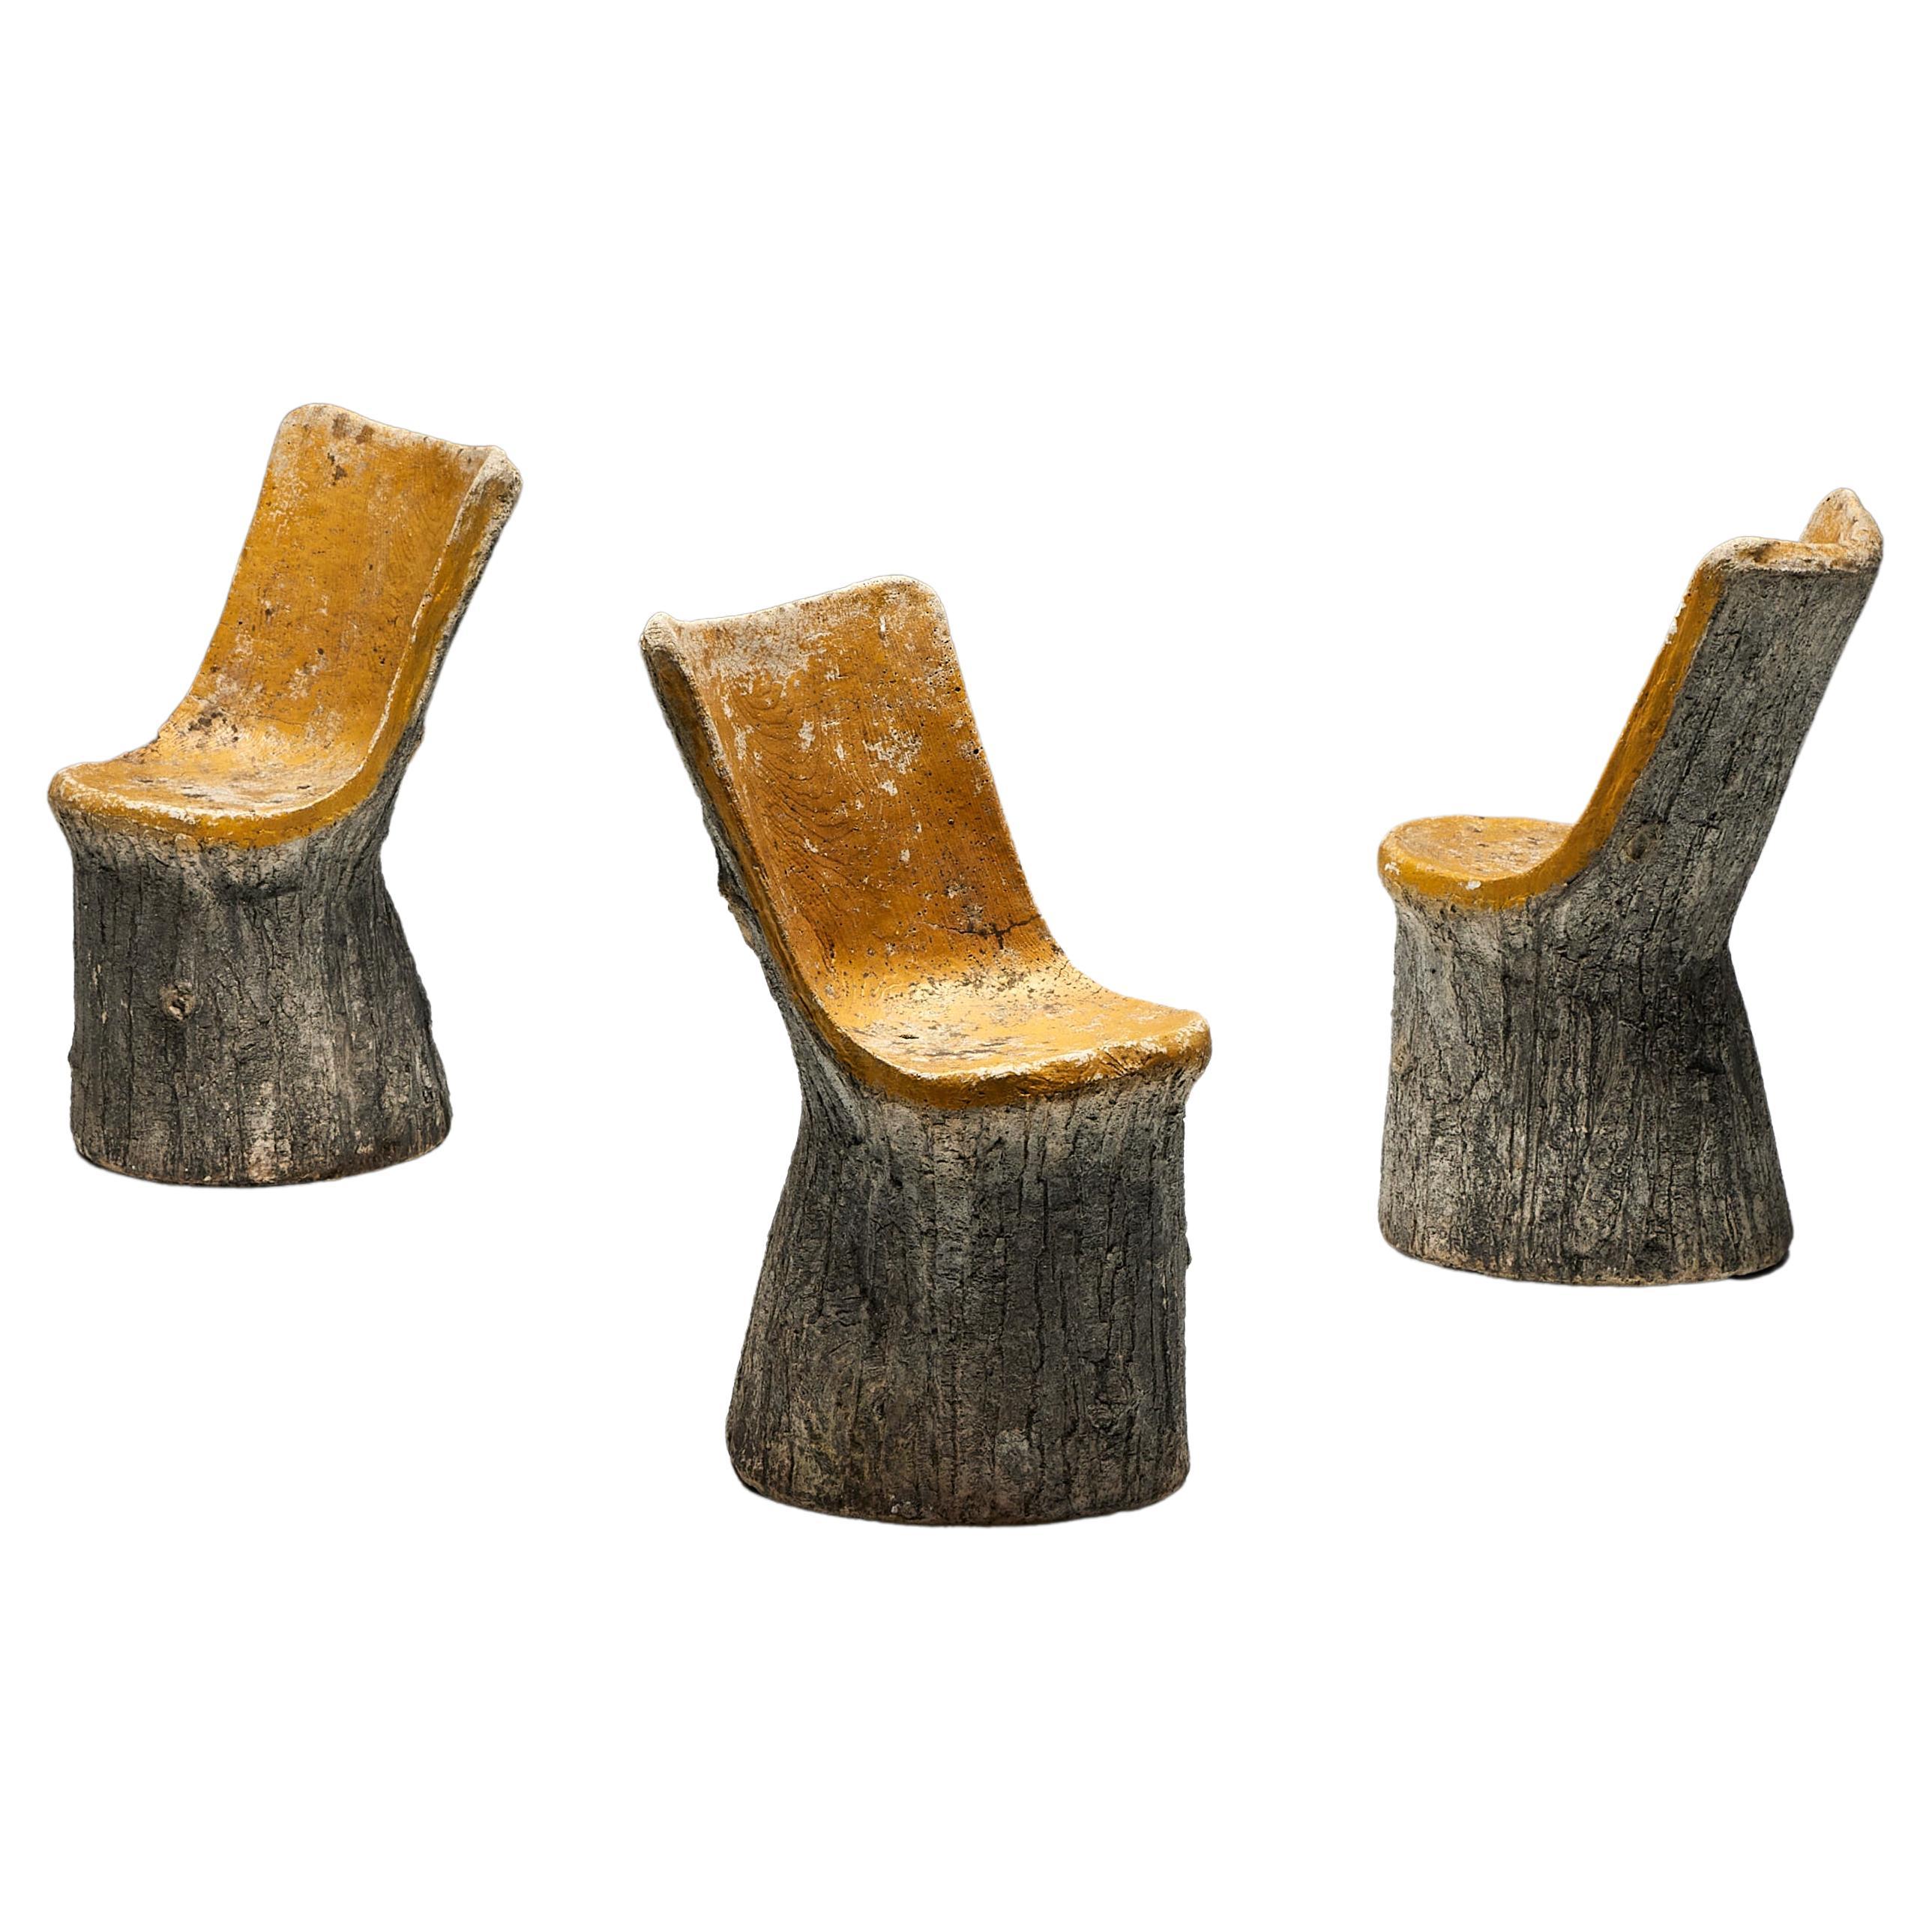 Brutalist Concrete Chairs, France, 1970s For Sale